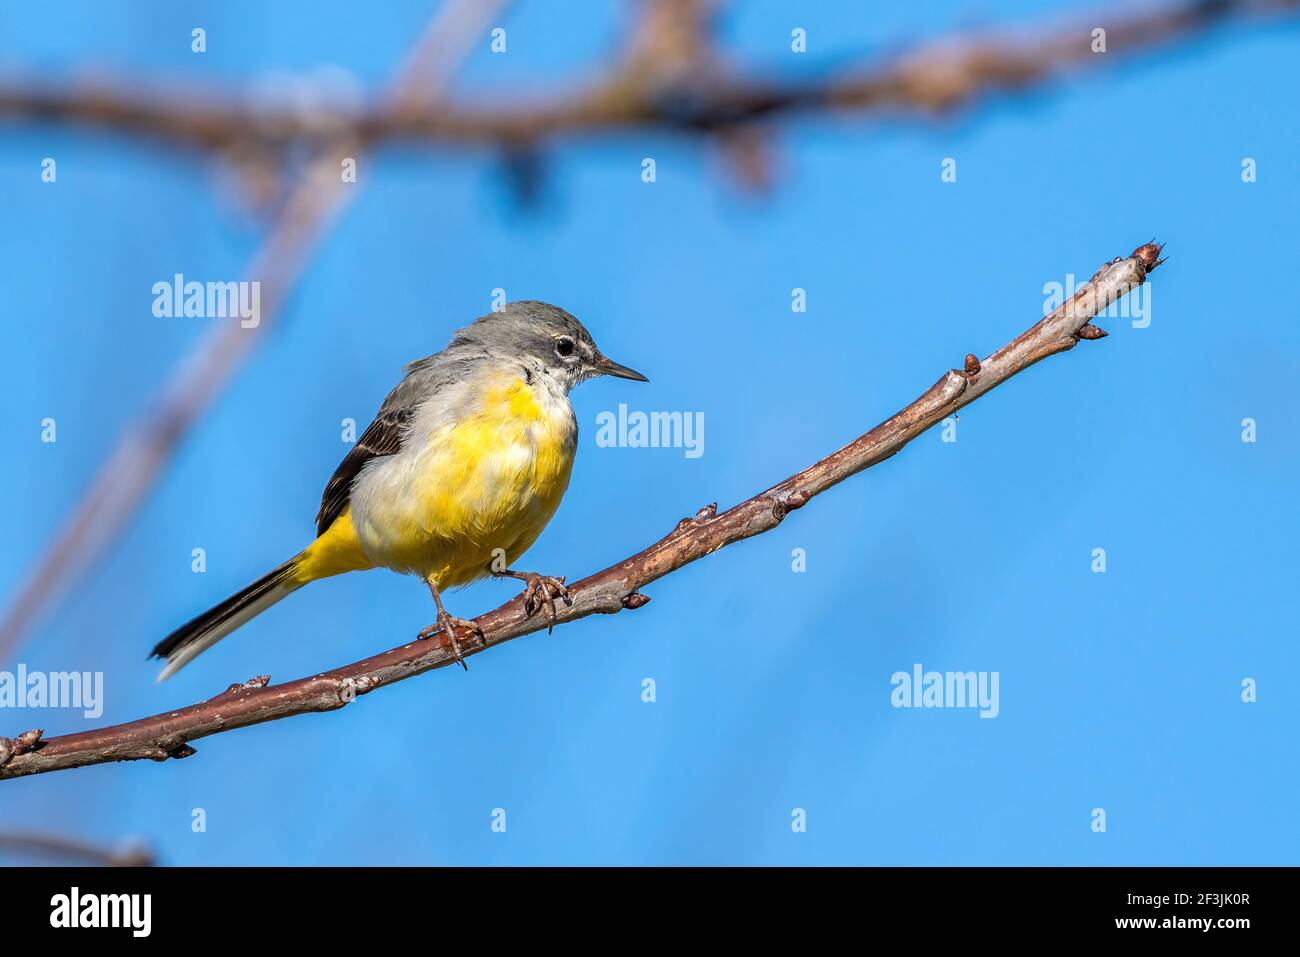 Grey Wagtail (Motacilla cinerea) on a tree branch which is a common insect eating bird with a yellow under belly and usually found by a stream or a ri Stock Photo